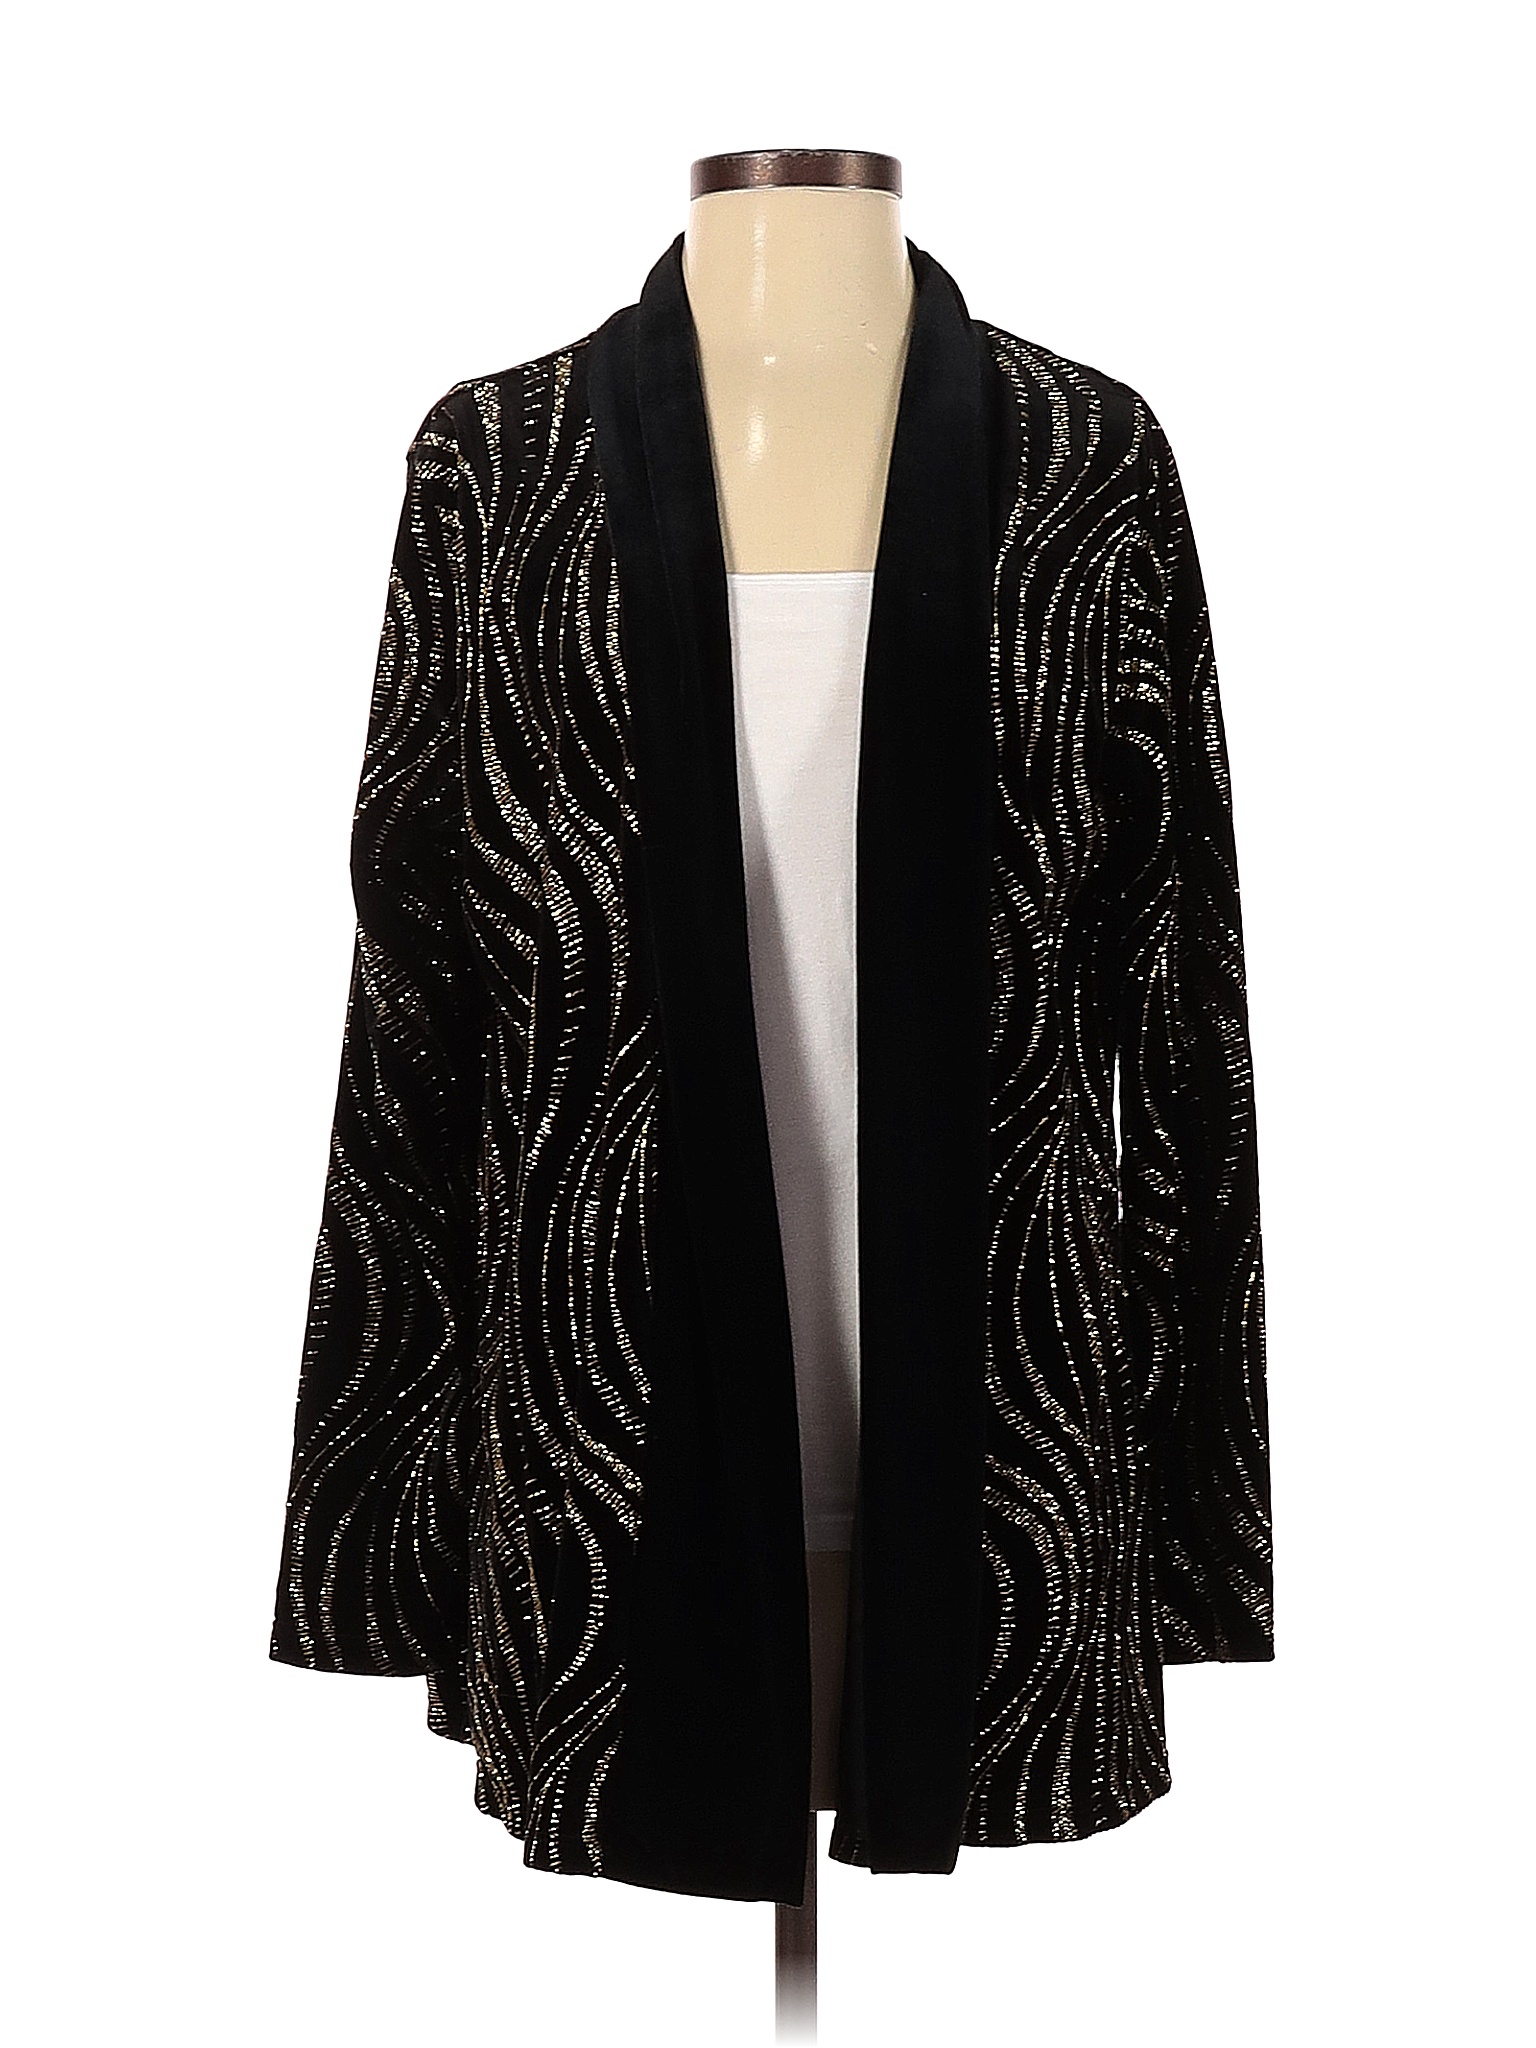 Notations Solid Black Cardigan Size S - 73% off | thredUP